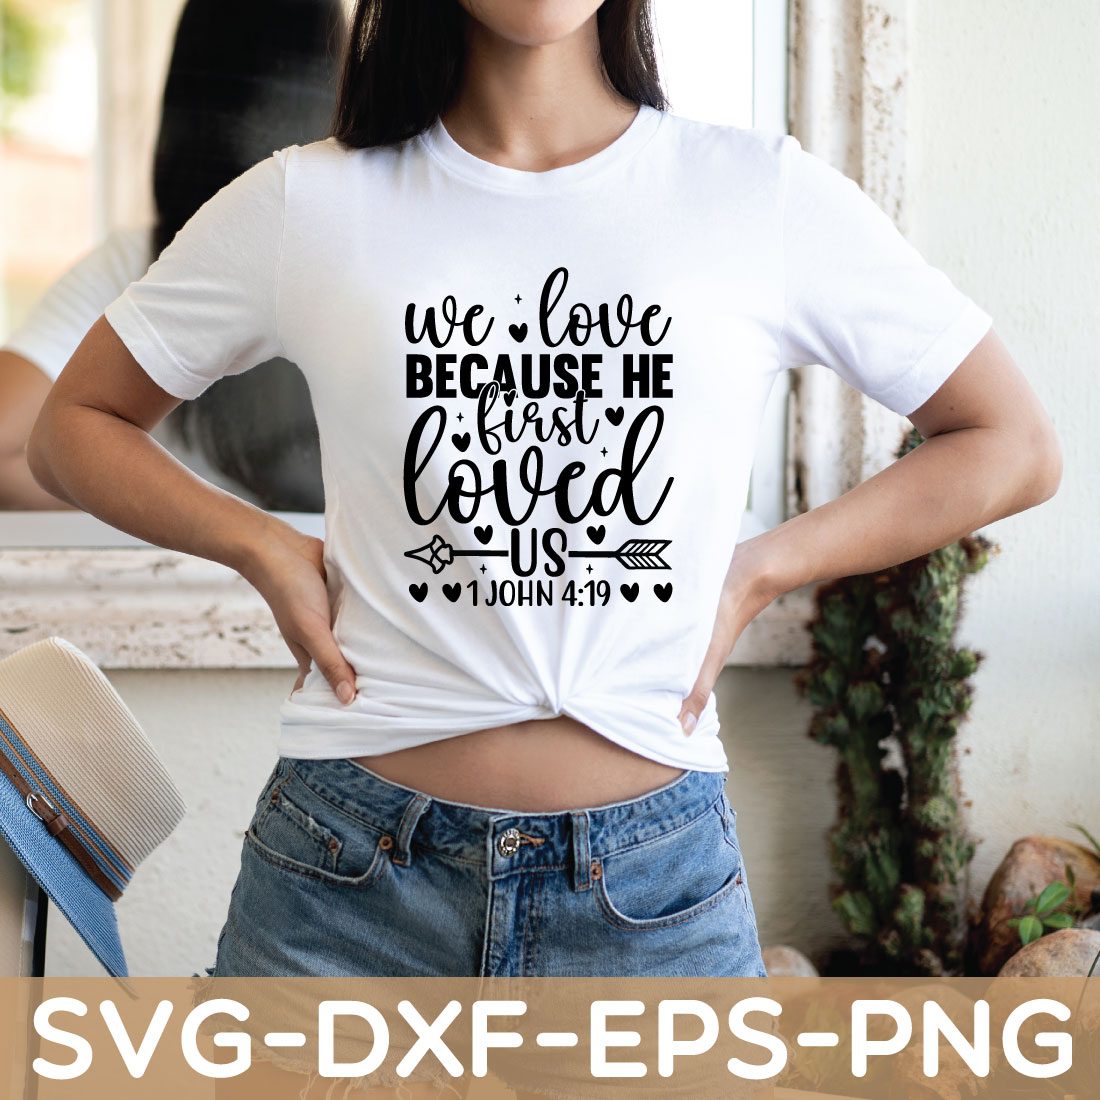 we love because he first loved us 1 john 4:19 shirt preview image.